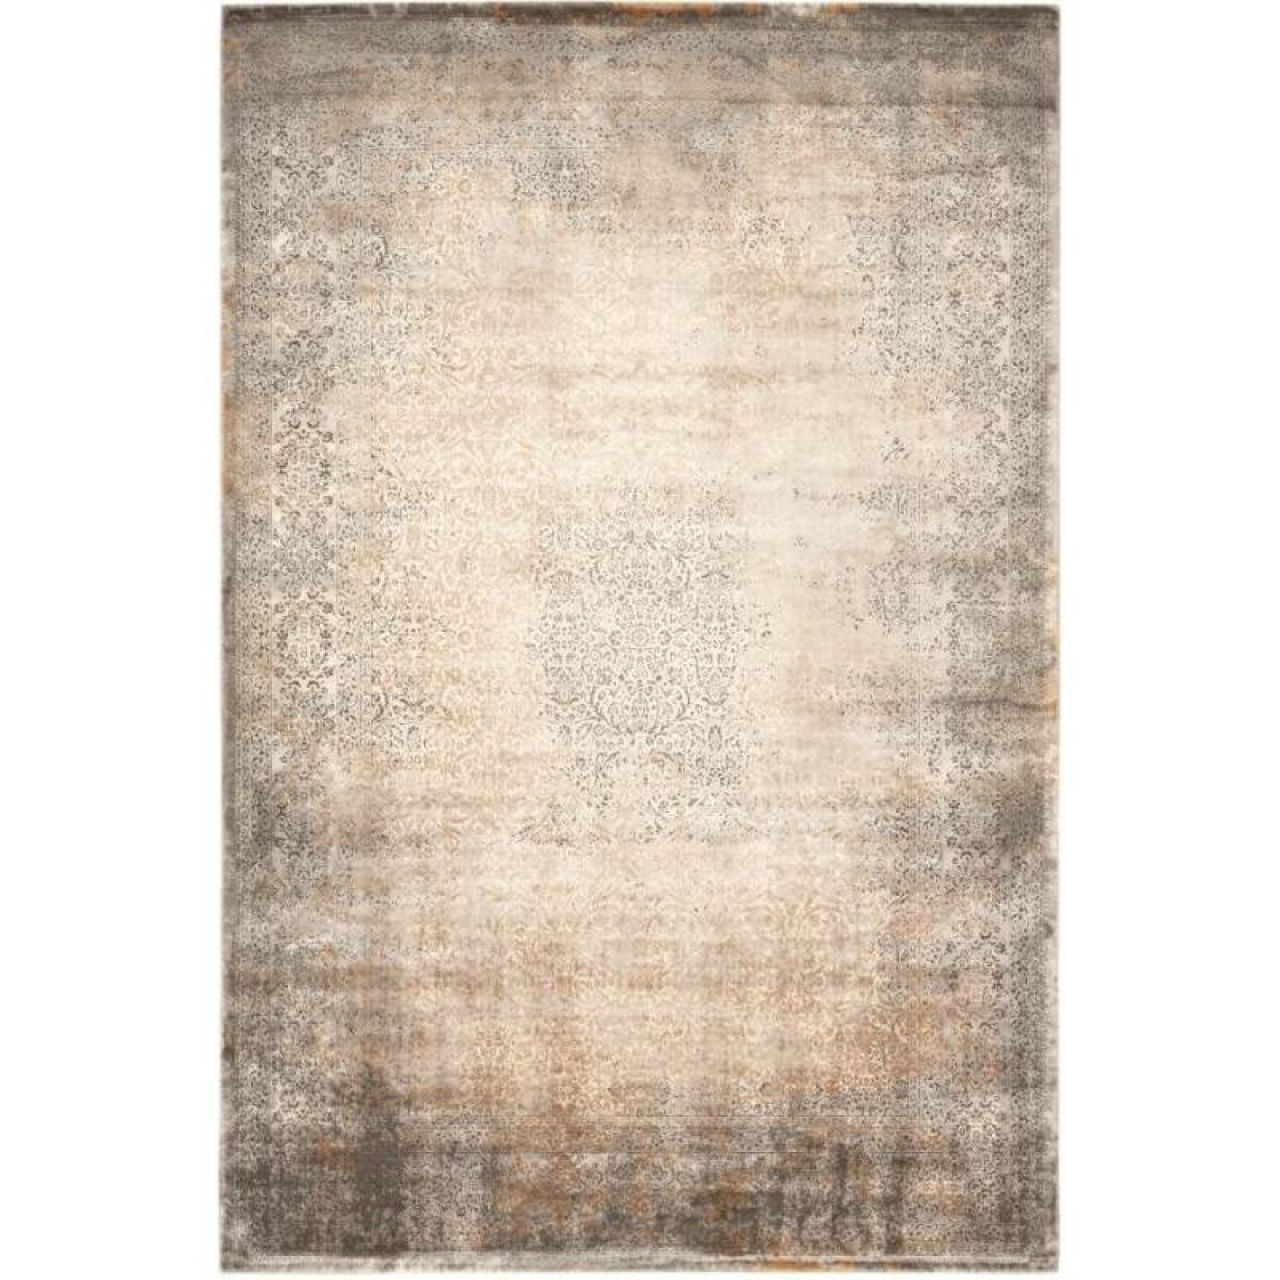 Obsession Haute Couture Jewel 954 Taupe szőnyeg-120x170